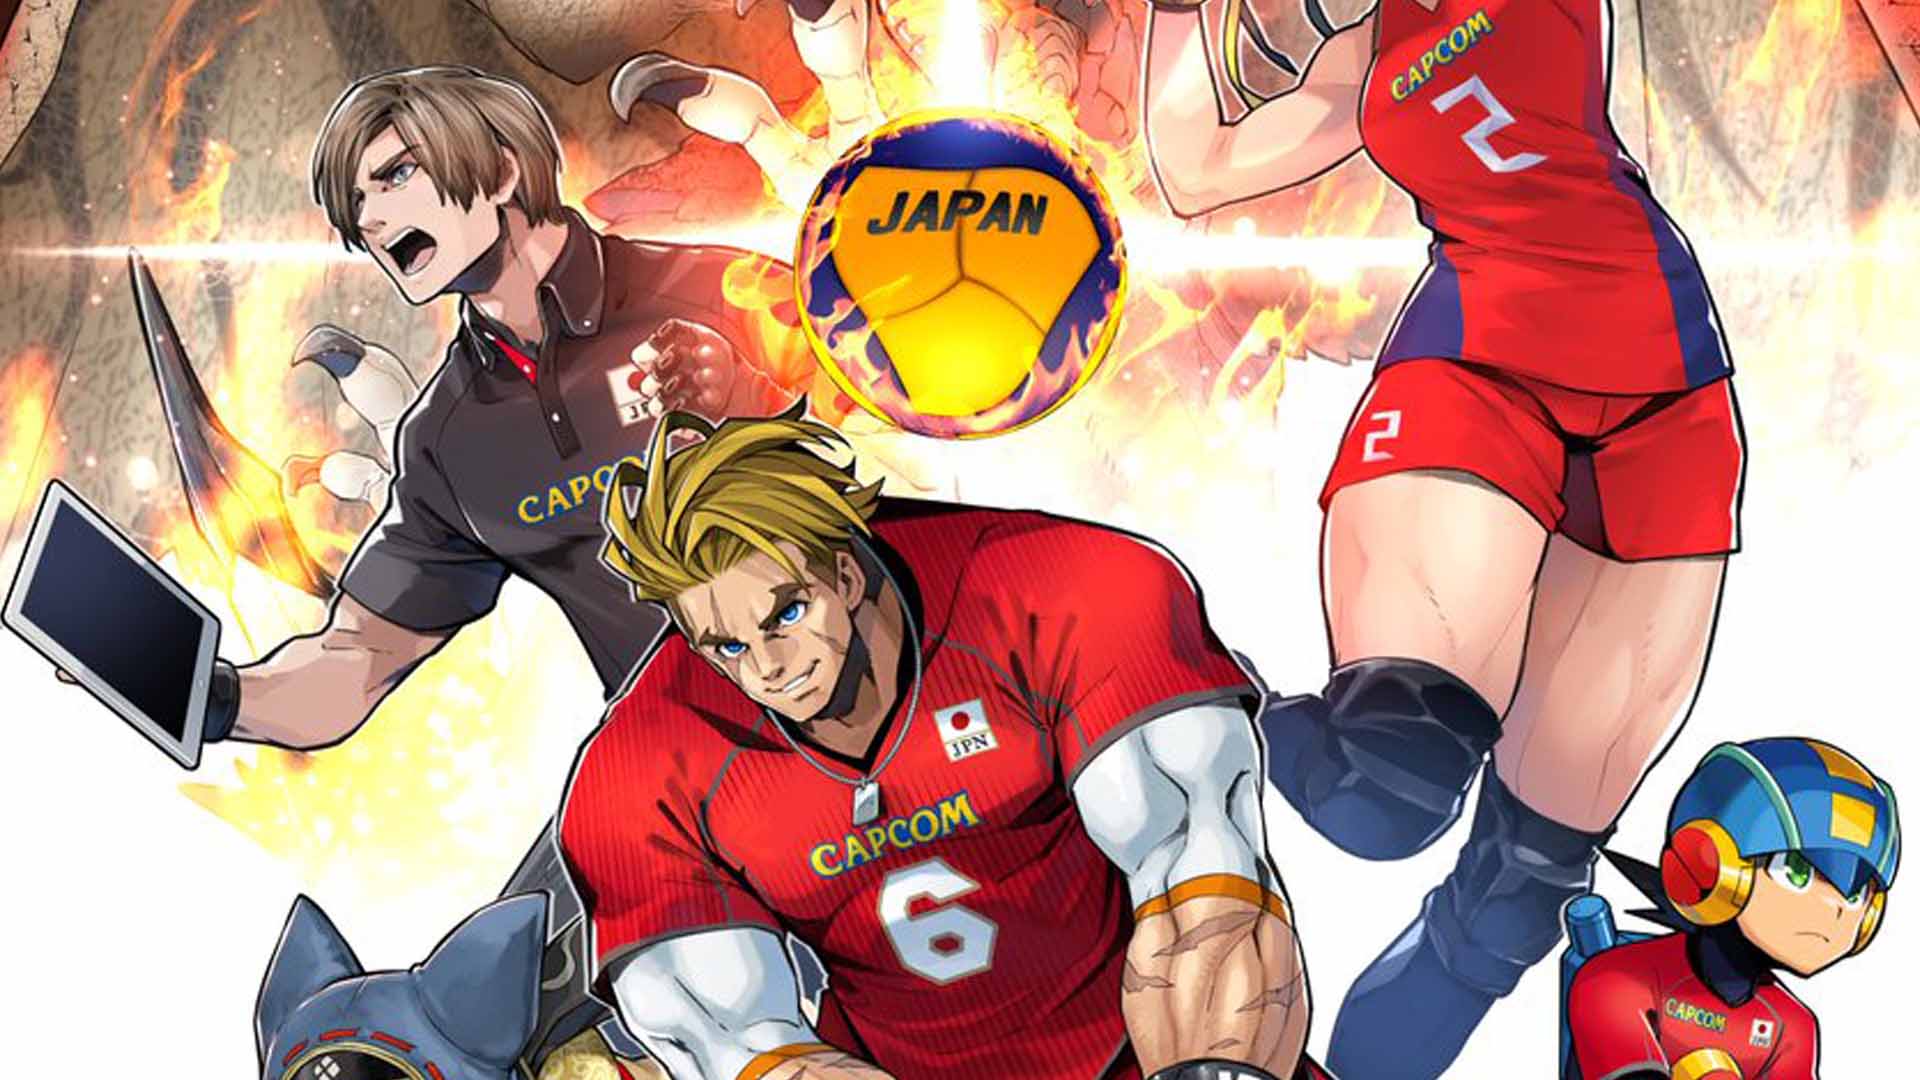 Capcom shares some fun promotional art for partnership with national ...